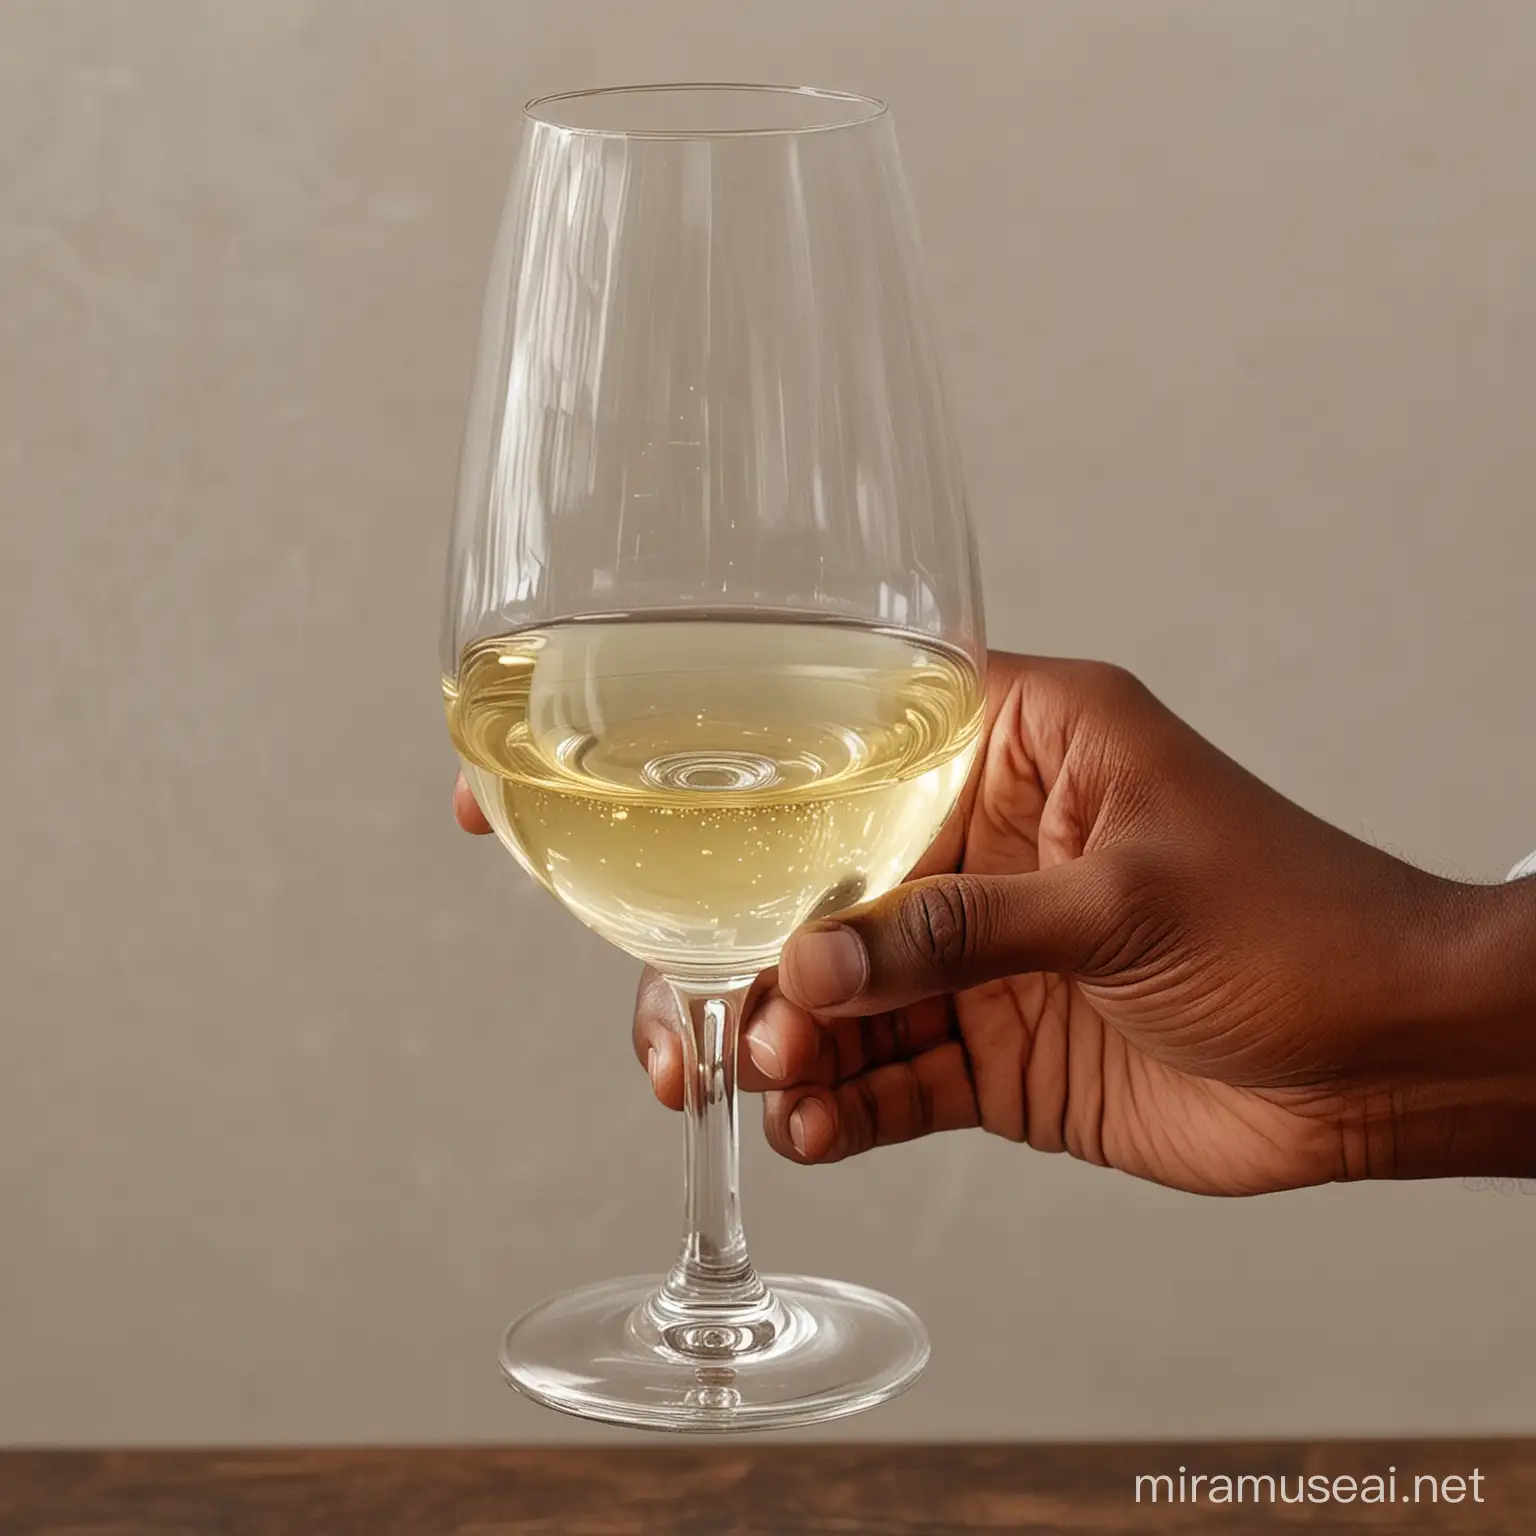 Closeup of Black Mans Hand Holding Wine Glass with White Wine